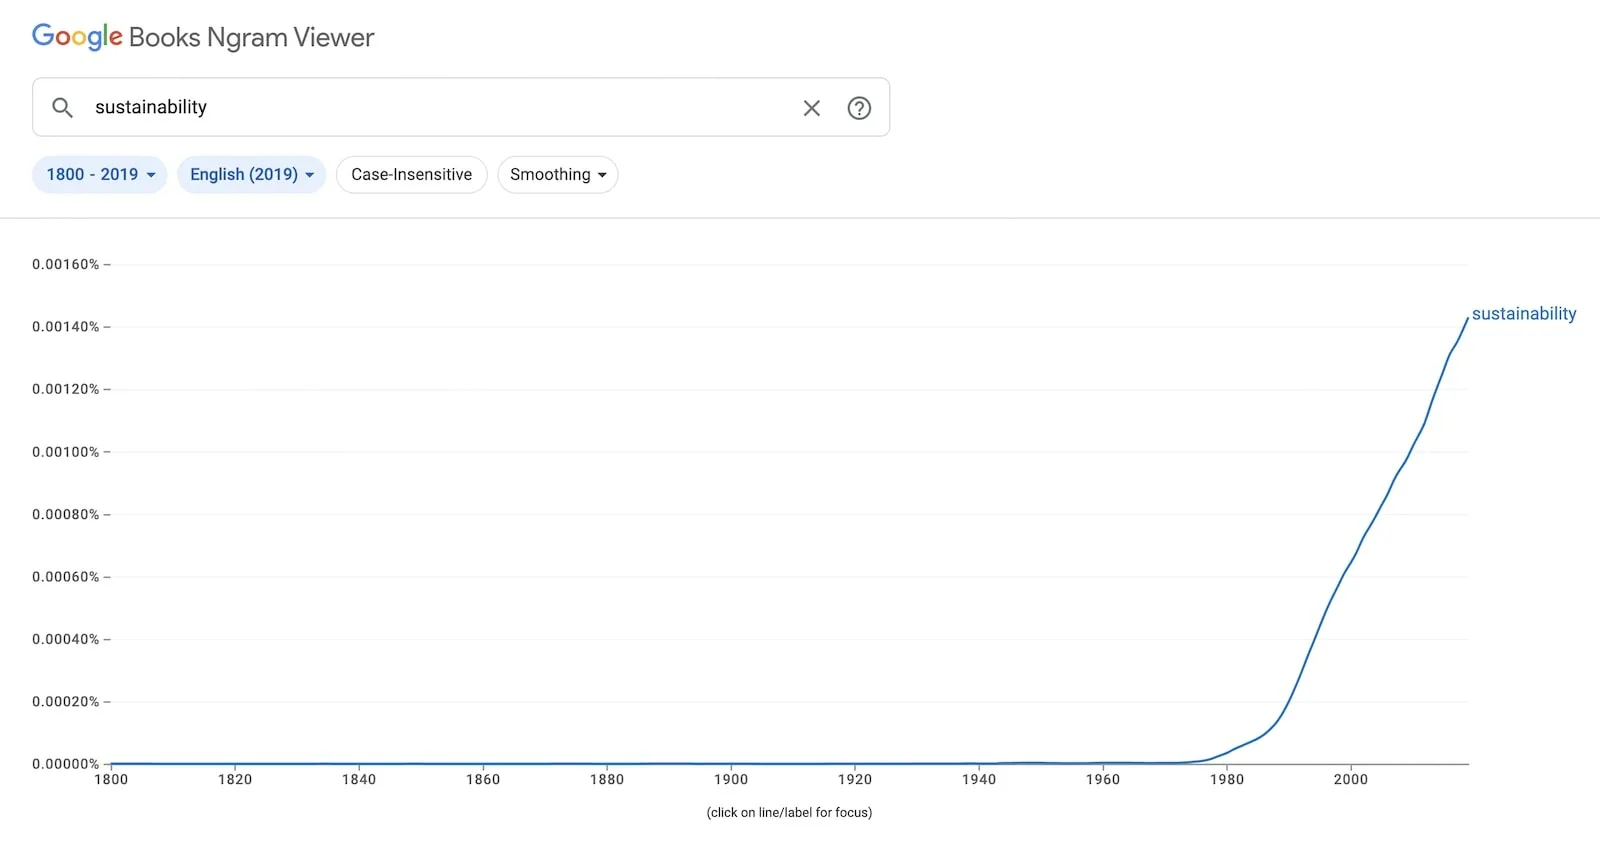 Sustainability mentions over time from Google Ngram